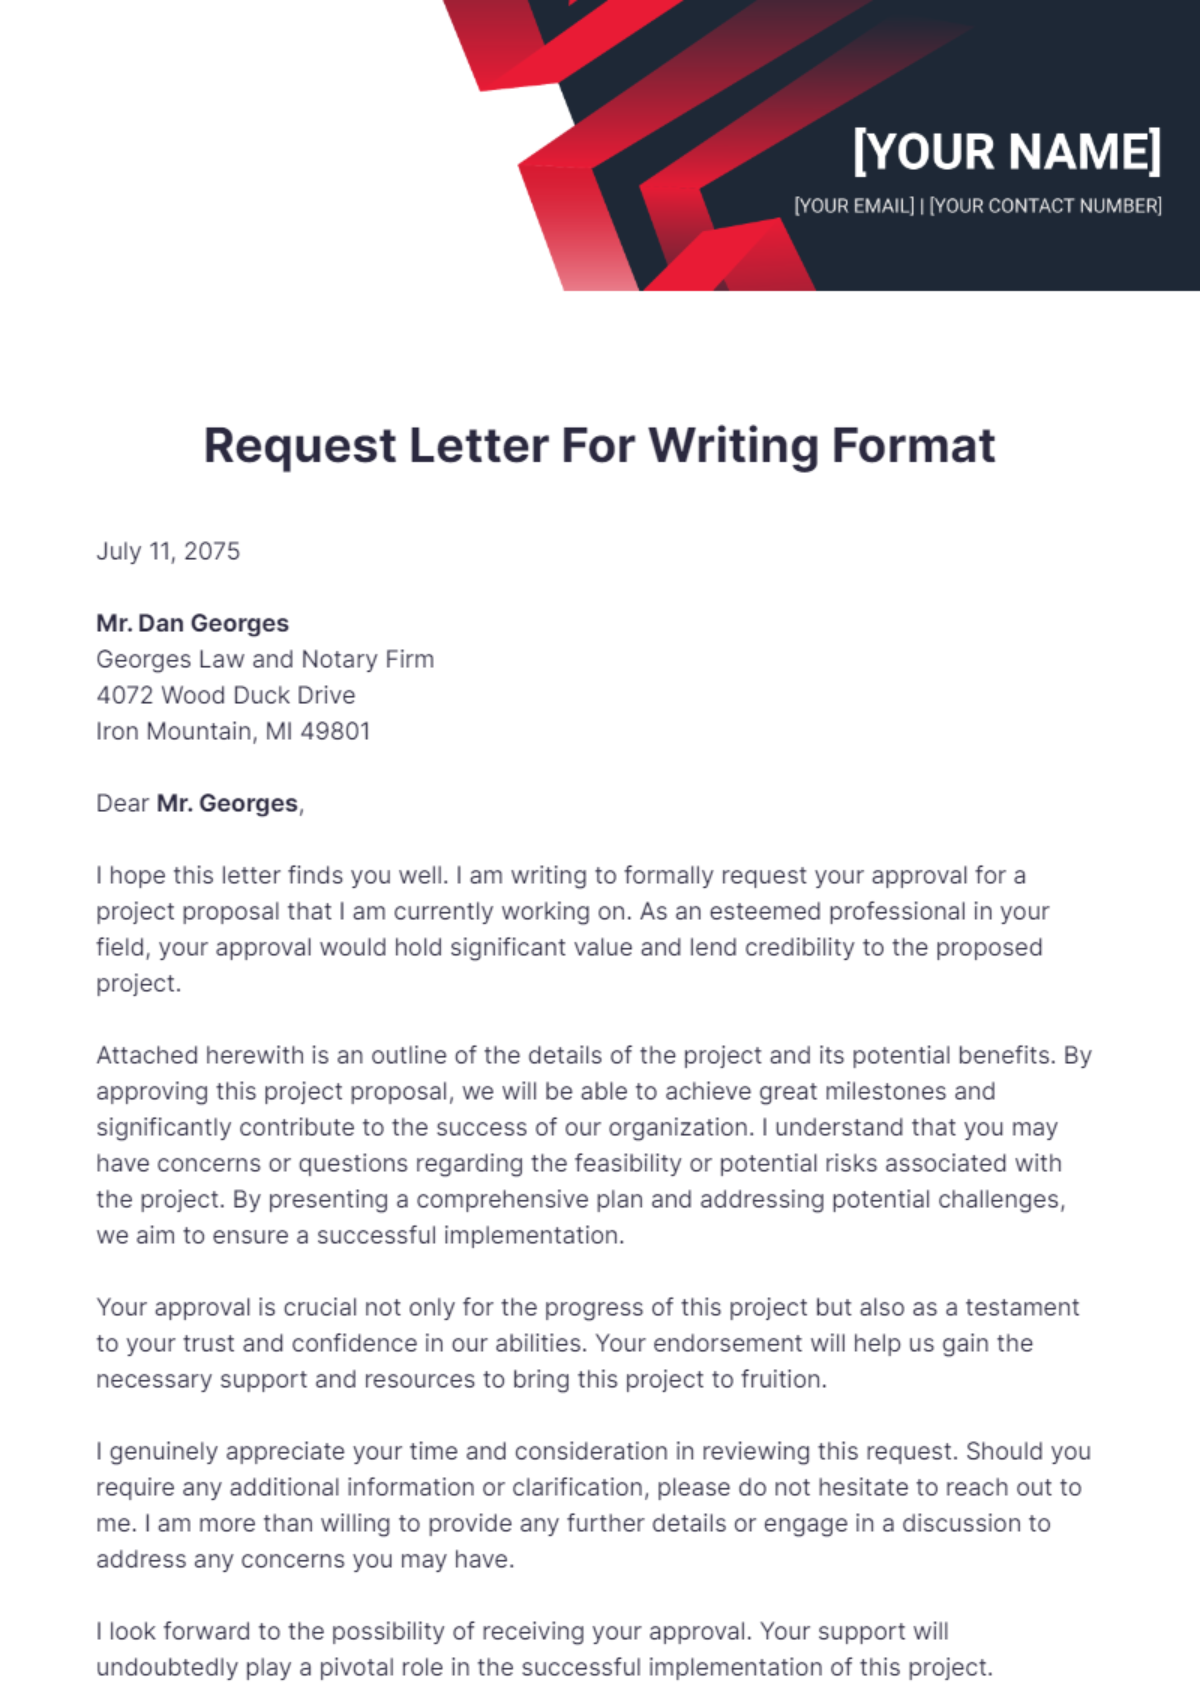 Free Request Letter Writing Format  Template